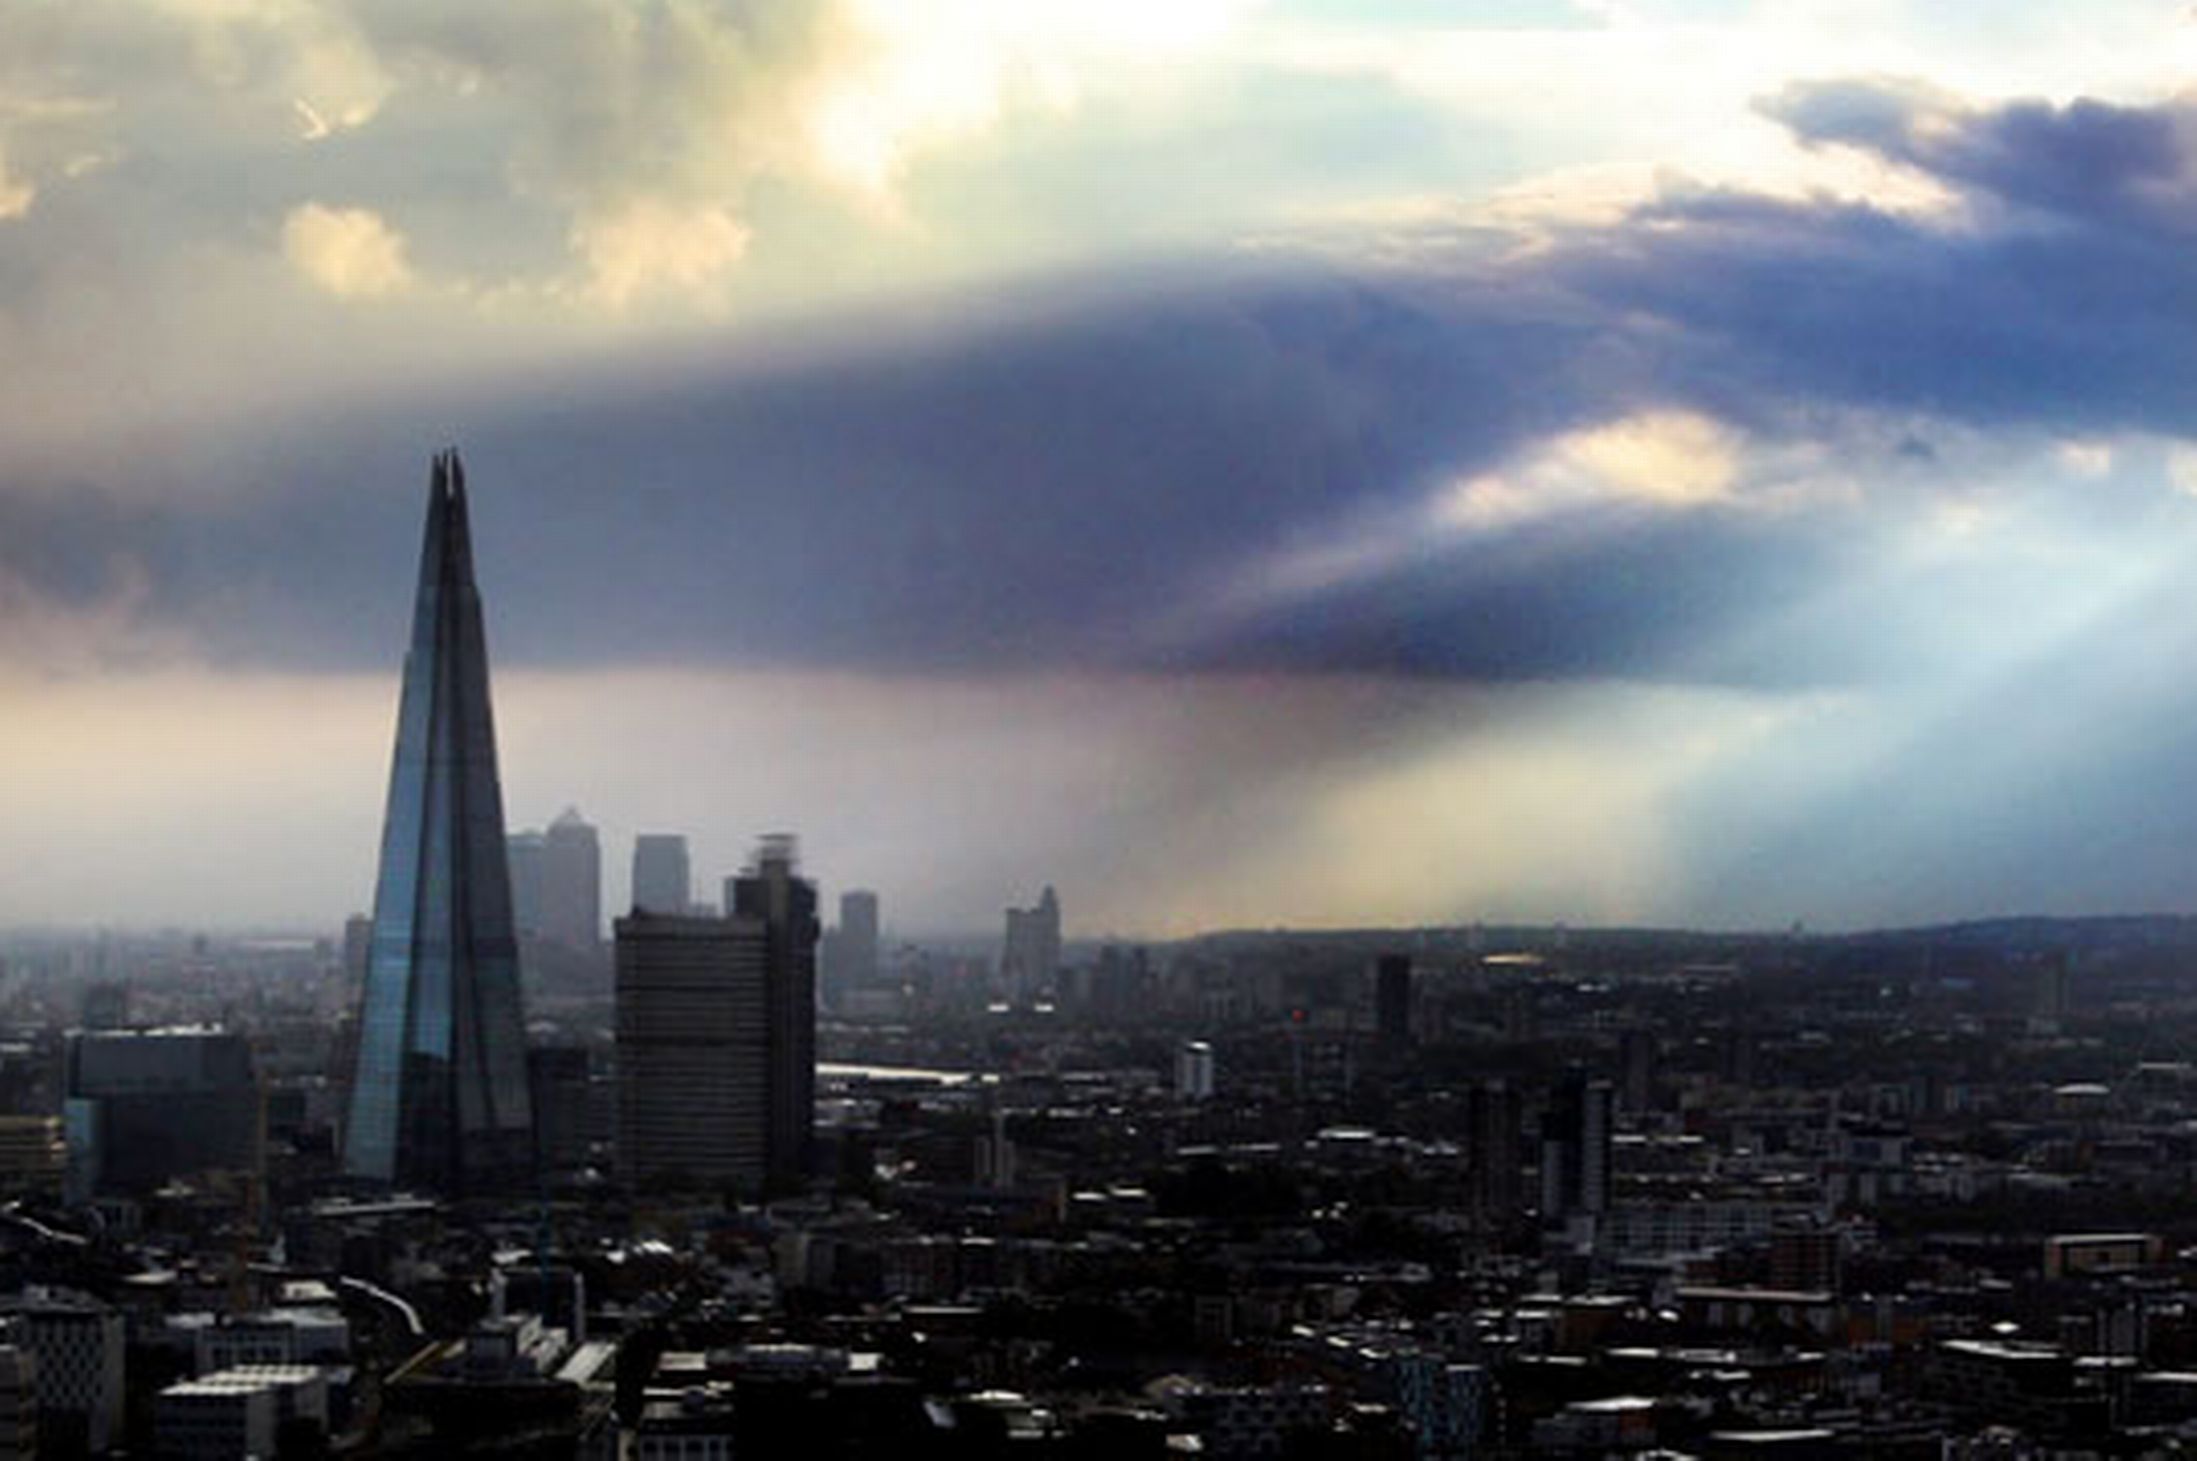 Sunrise-behind-The-Shard-as-seen-from-the-London-Eye-11th-October-2641143